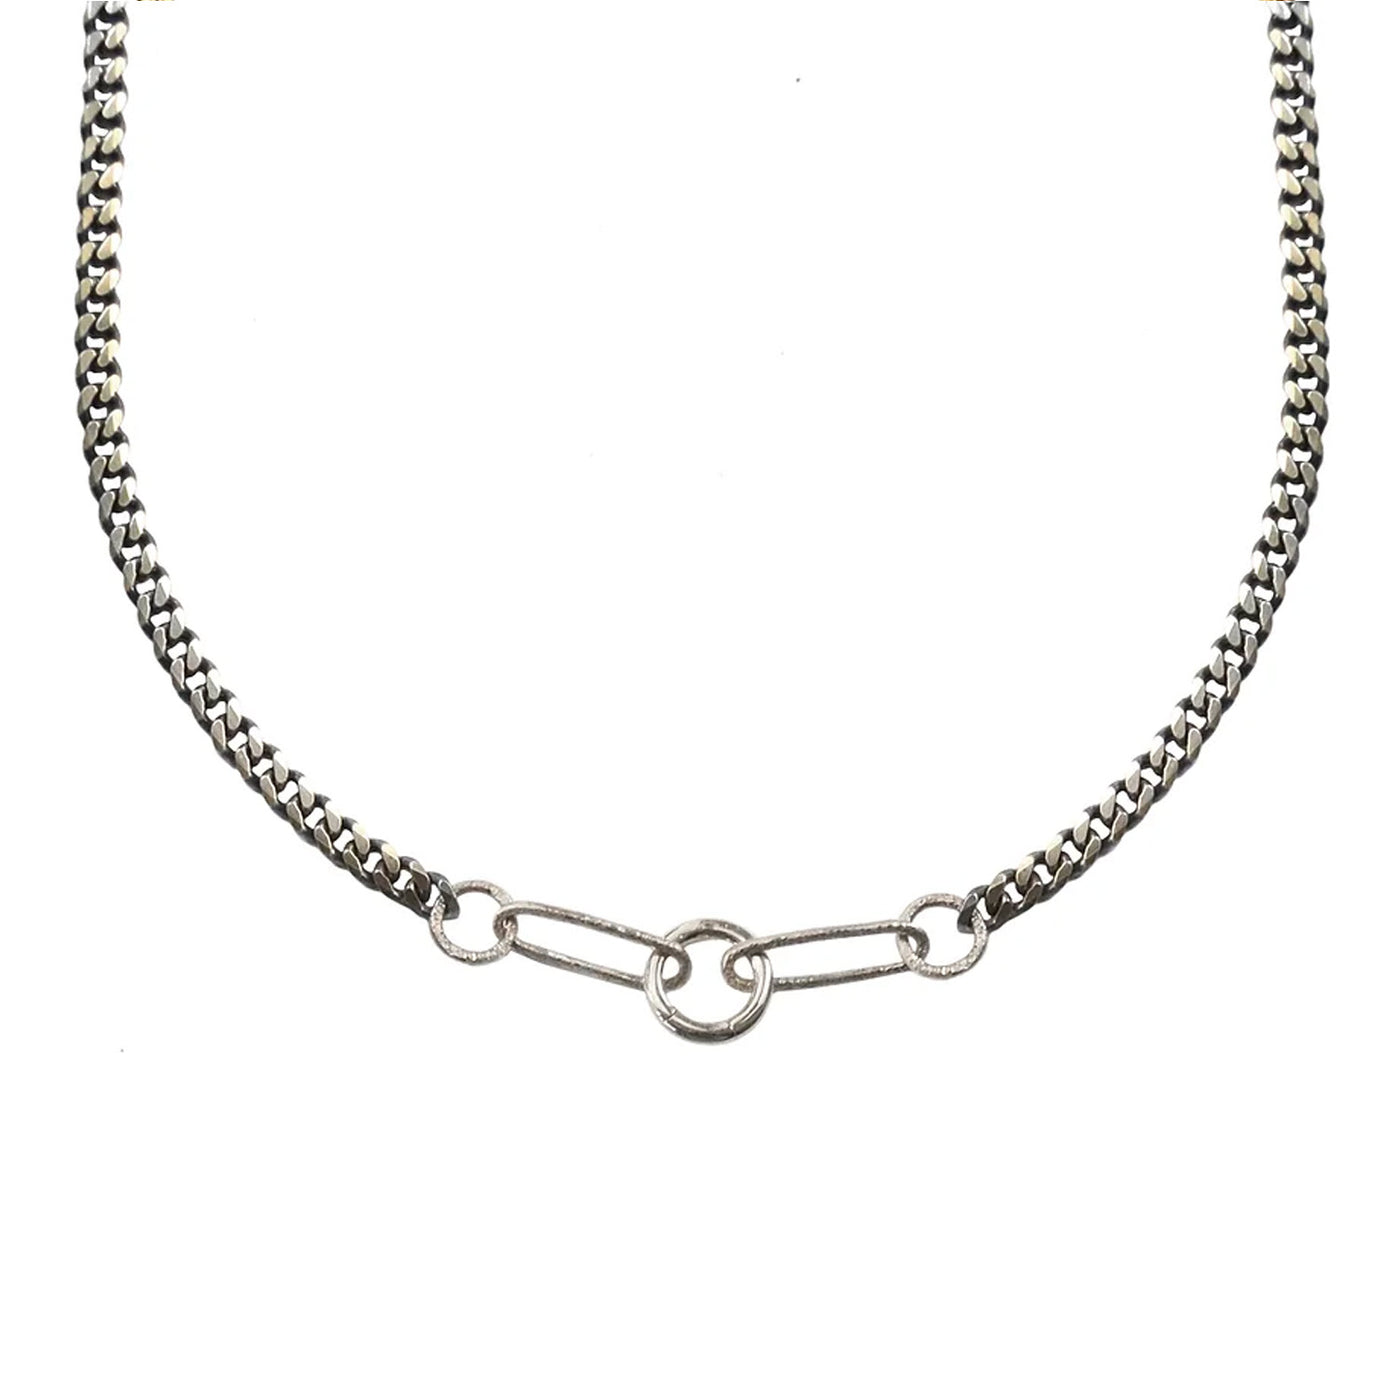 Five Link Charm Chain Necklace